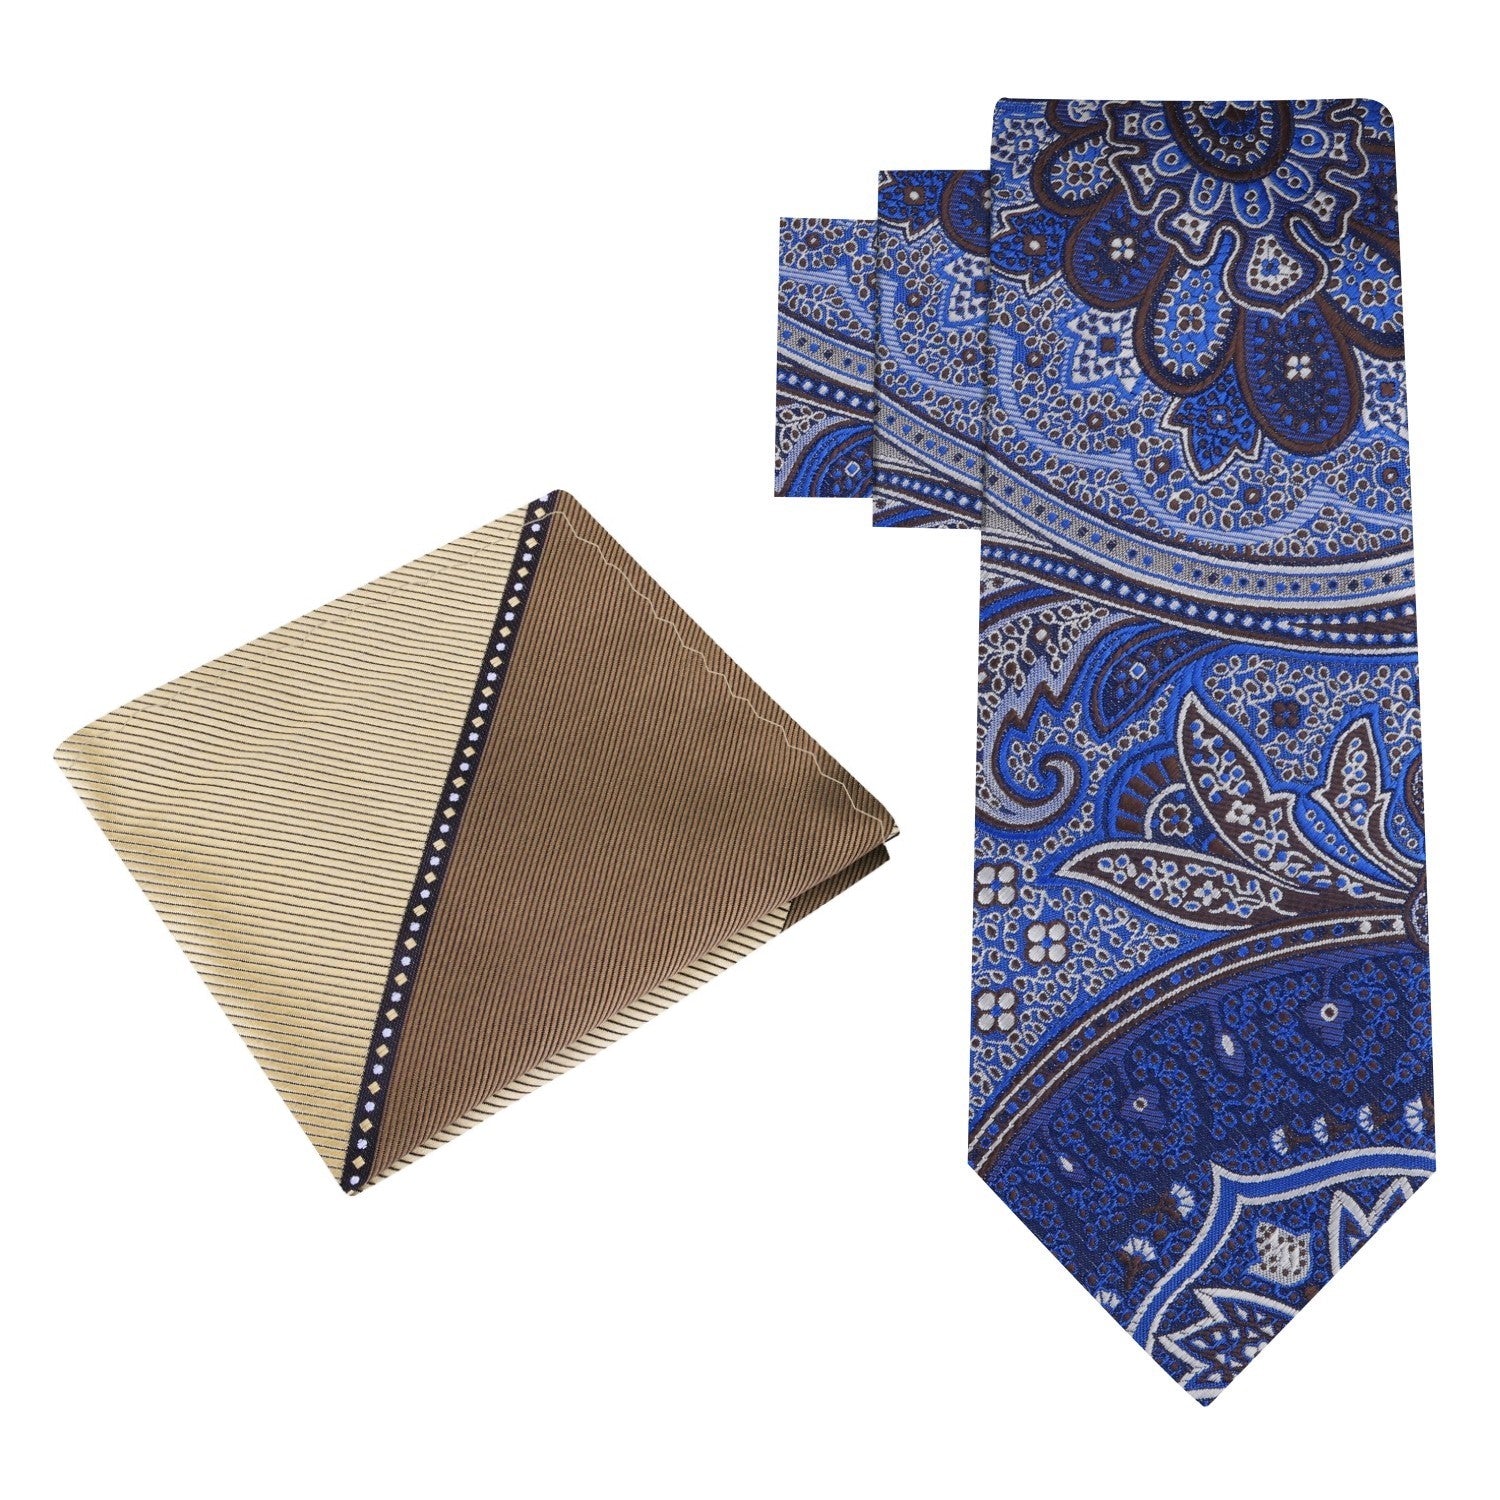 Alt View: Blue Brown Paisley Tie and Pocket Square